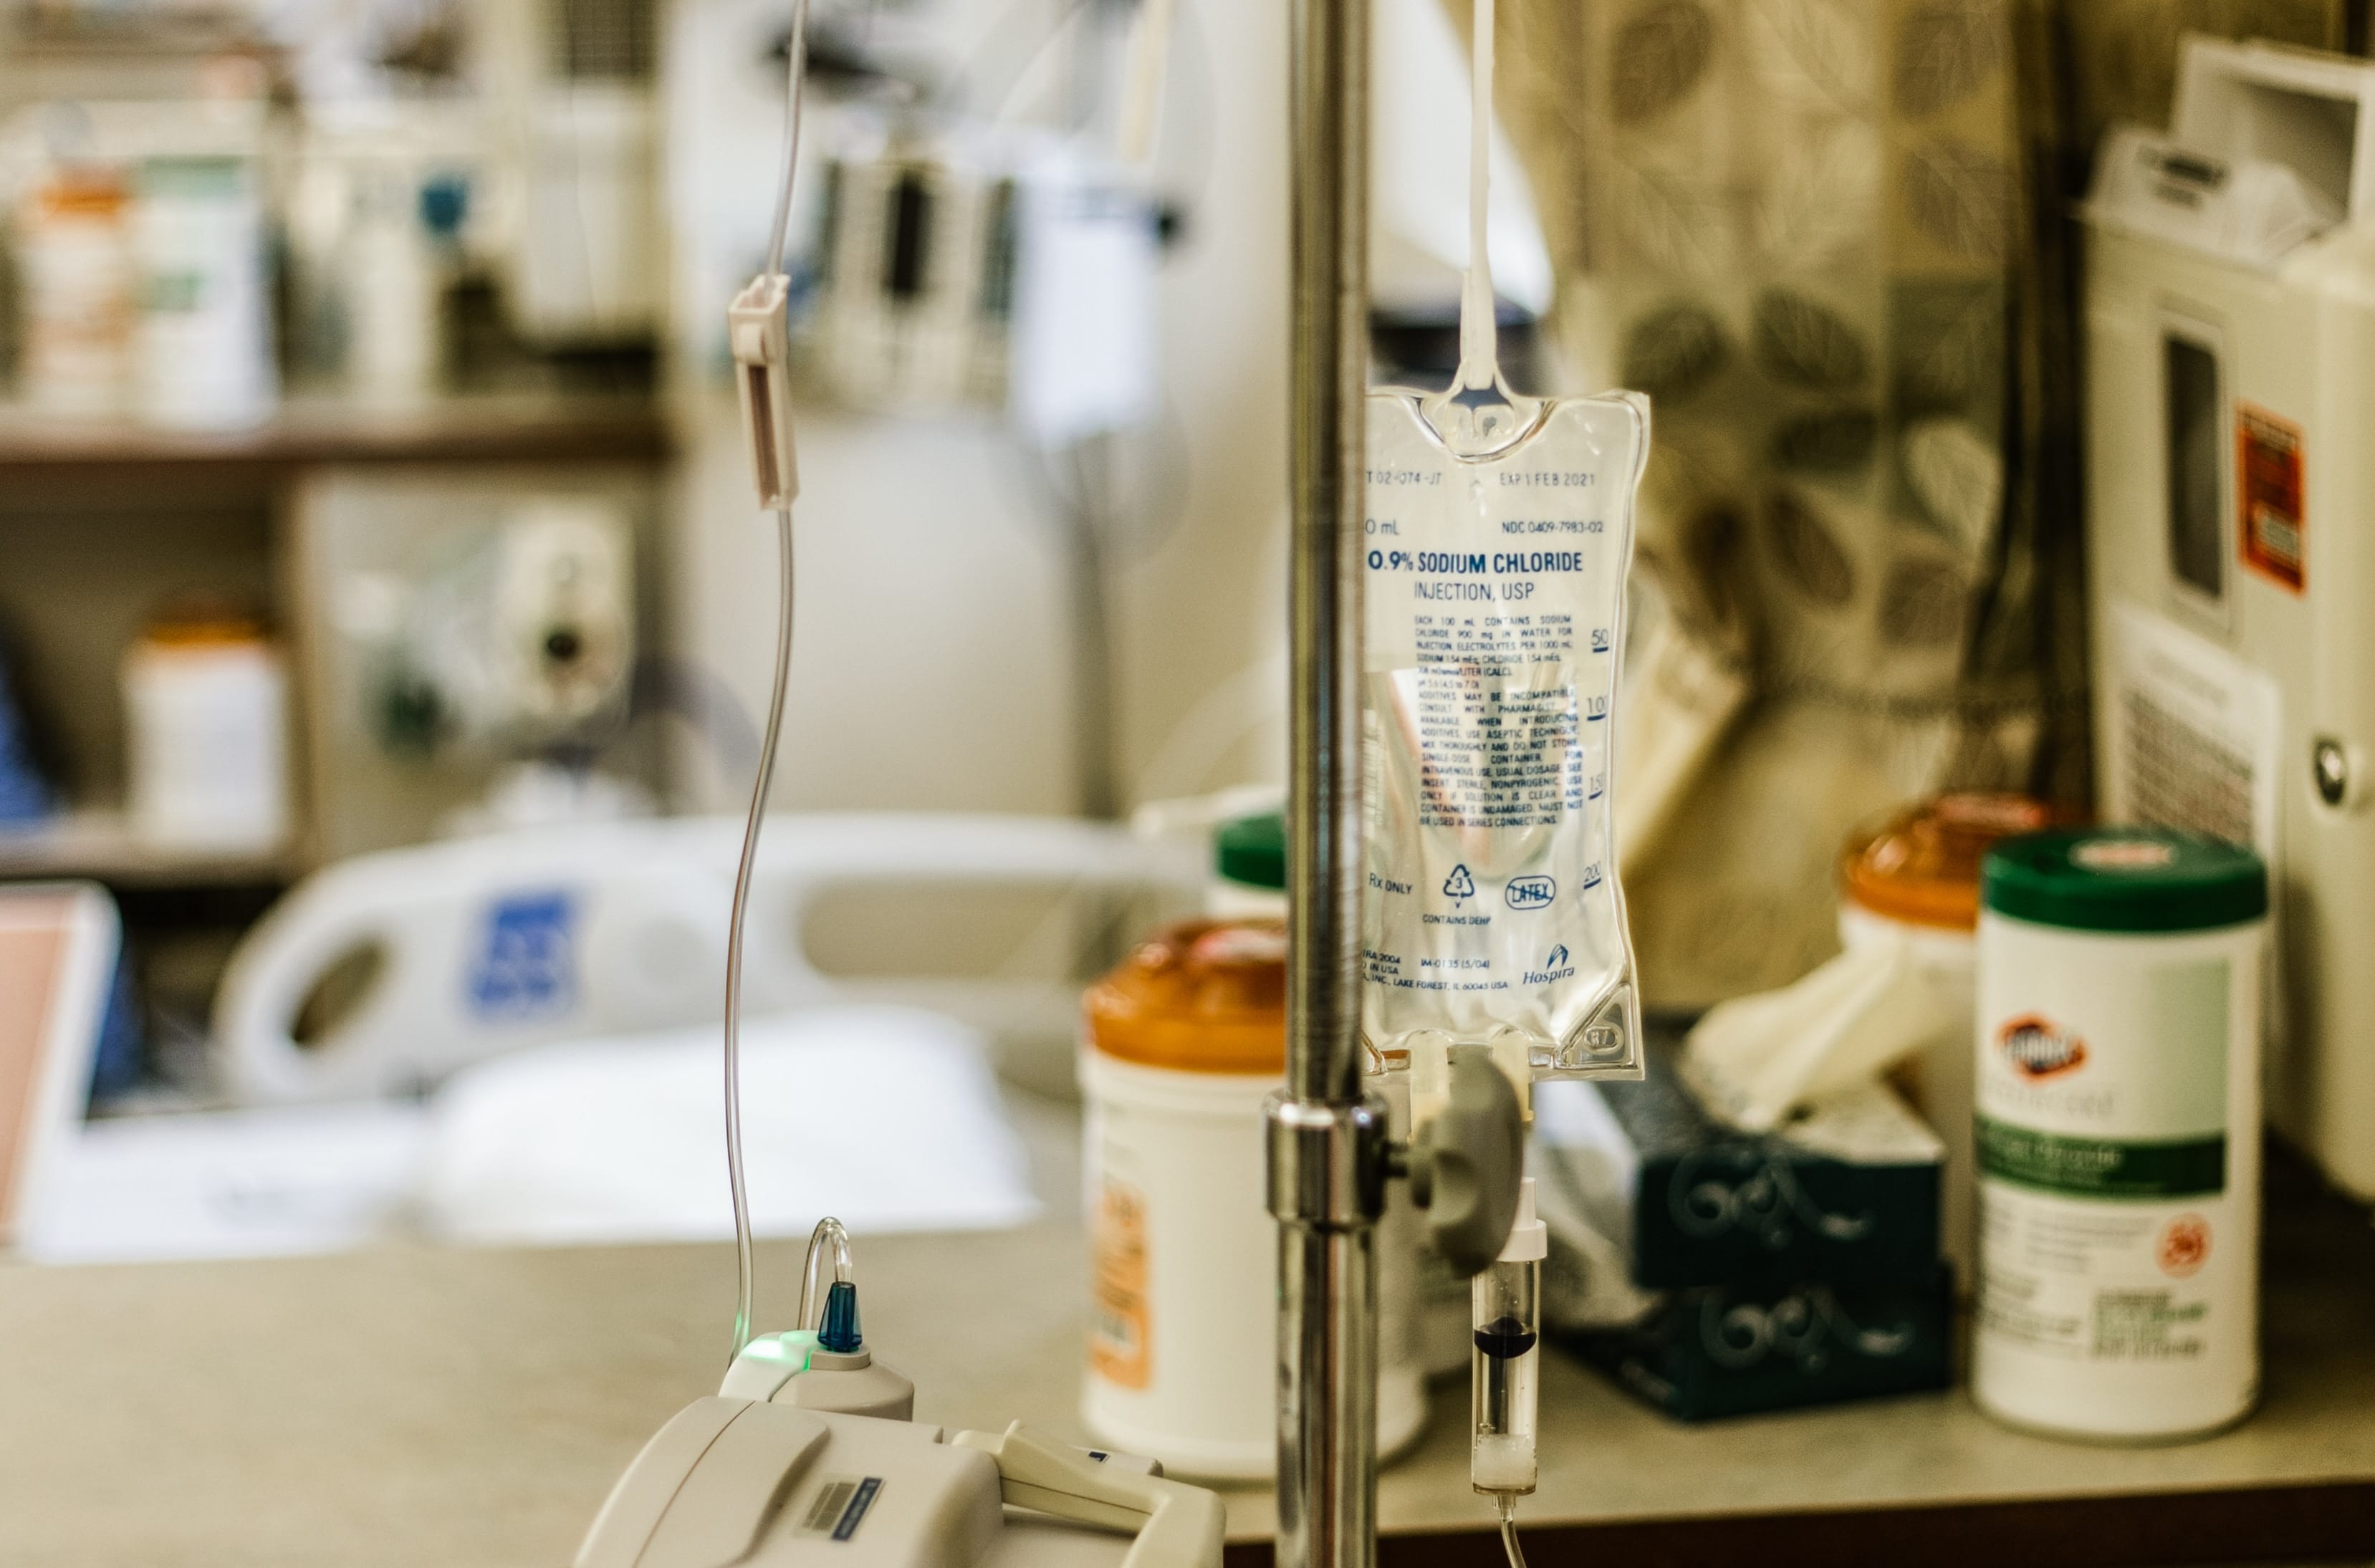 Selective focus photography of IV stand; image by Allie Smith, via Unsplash.com.